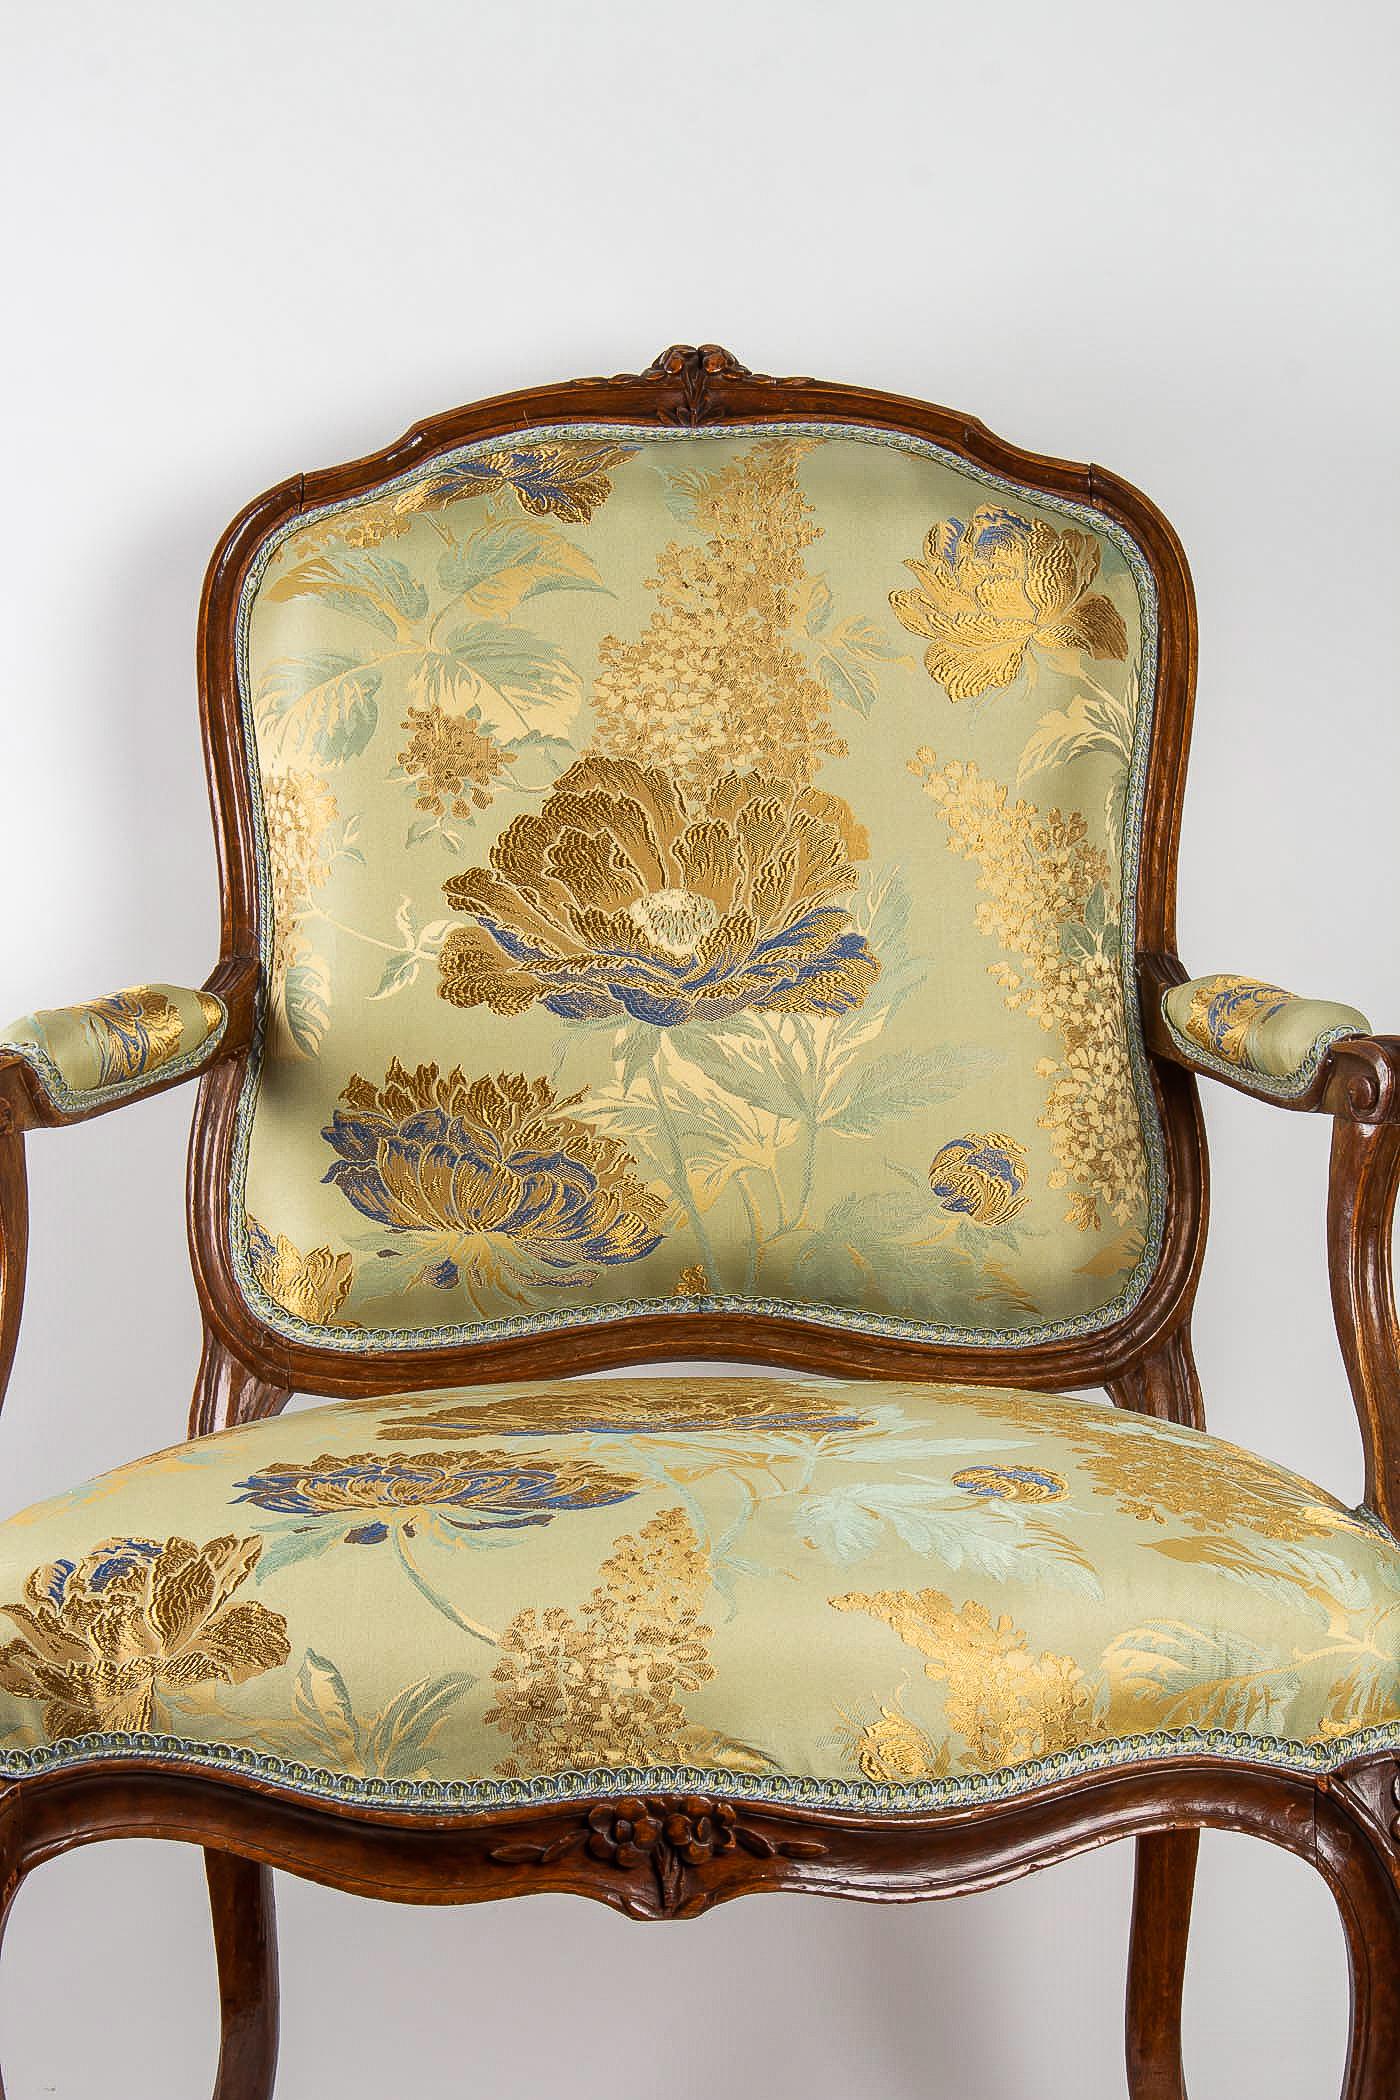 Louis XV Period Set of 4 of Large Armchairs, circa 1766-1770 by Louis Delanois In Fair Condition For Sale In Saint Ouen, FR